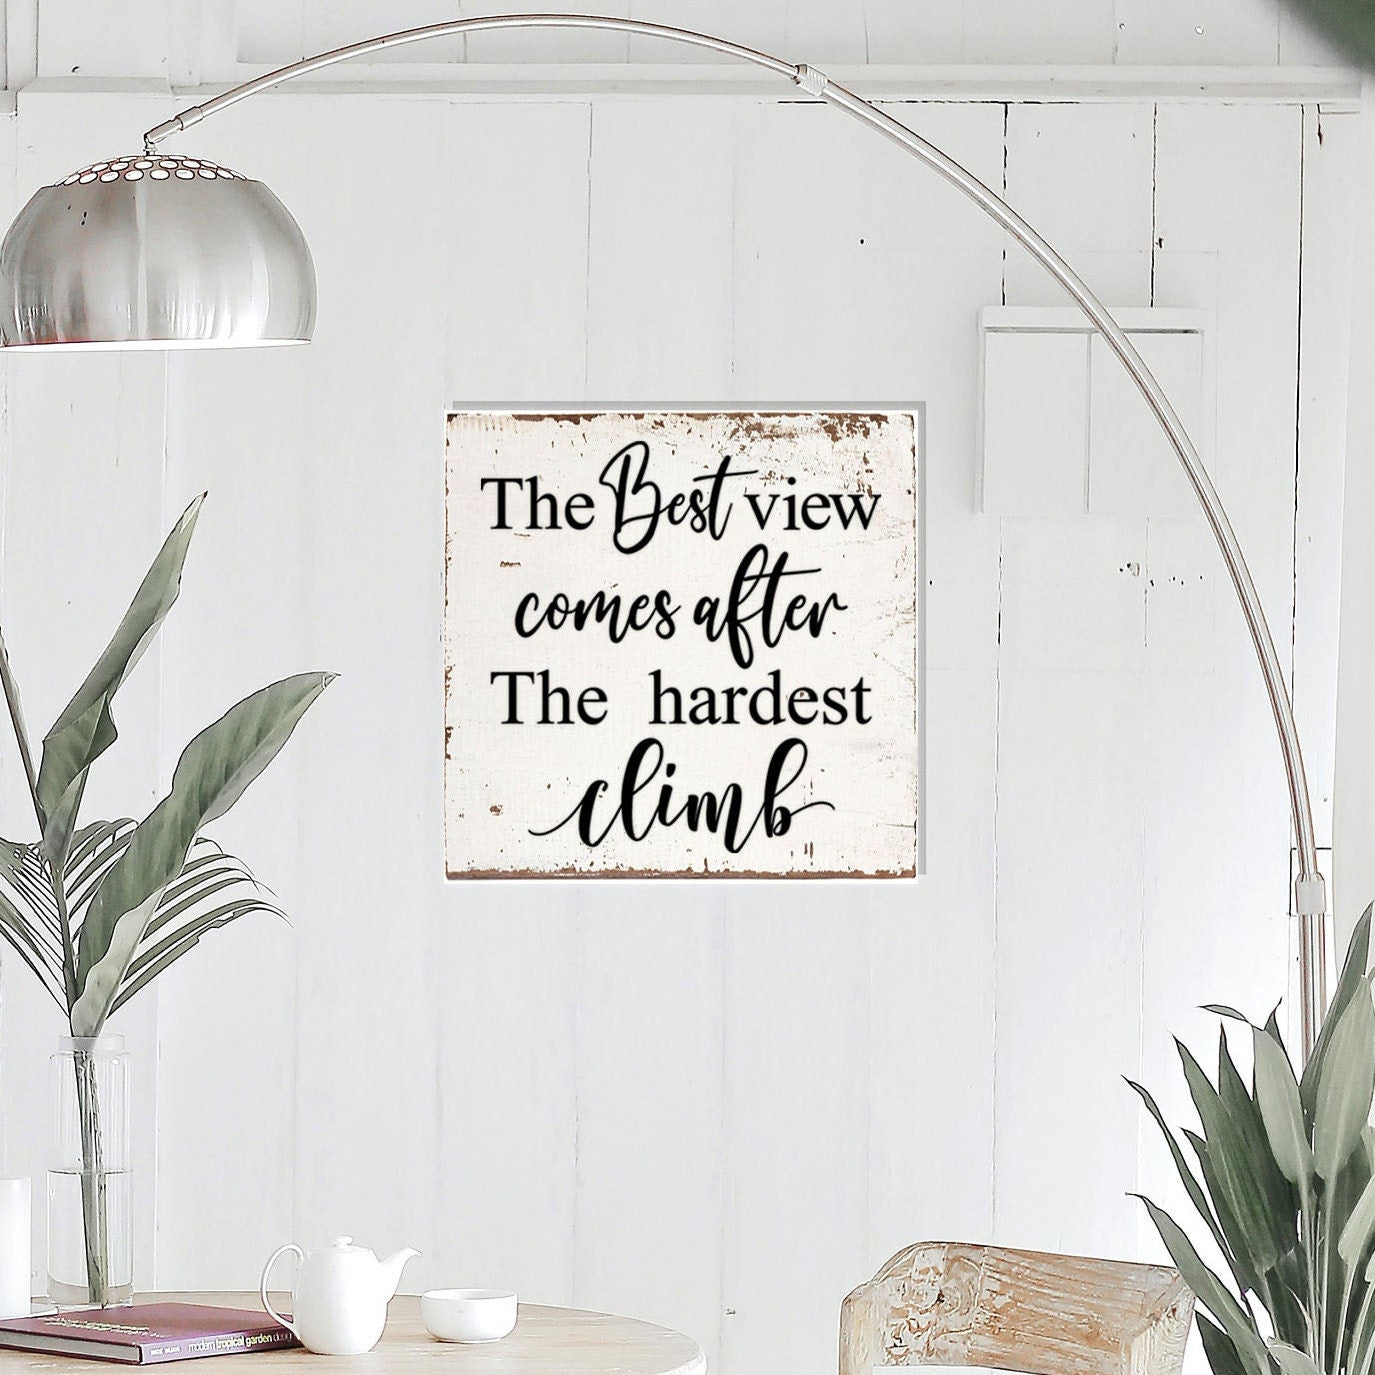 The best view comes the hardest climb motivational wood  signs, inspirational quote.